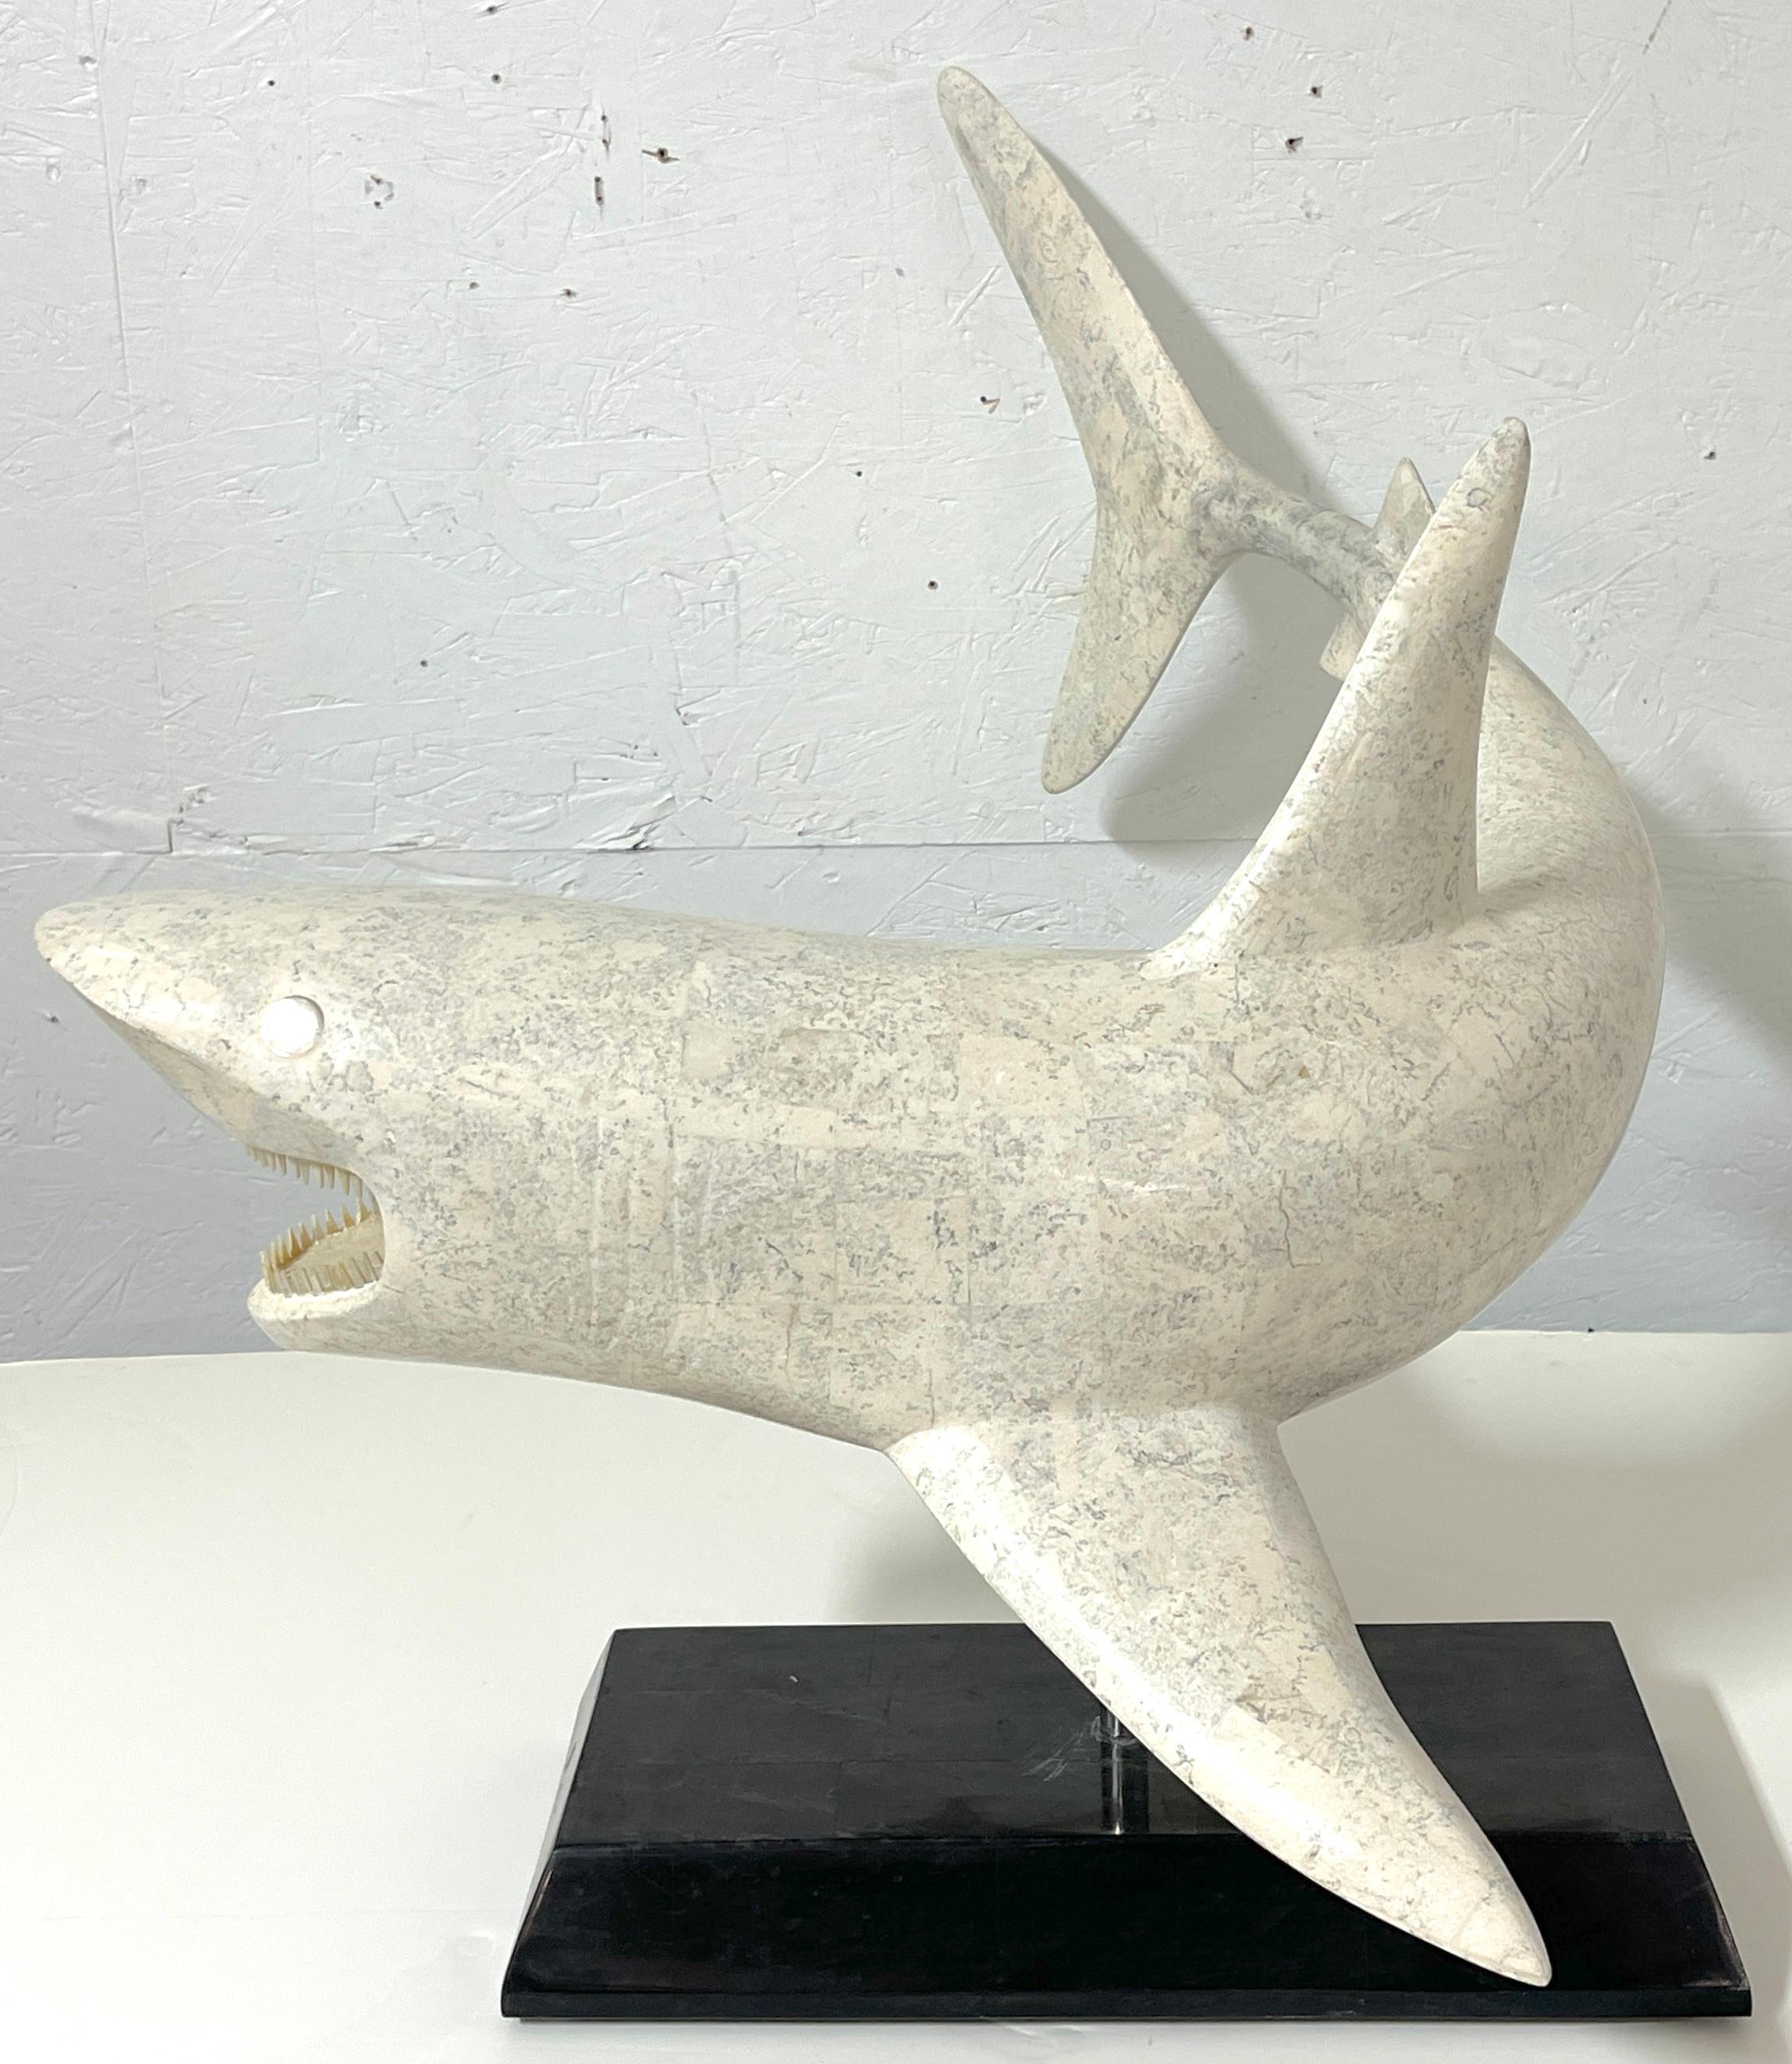 Large Modern Inlaid Tessellated Stone Sculpture of a Great White Shark   For Sale 4